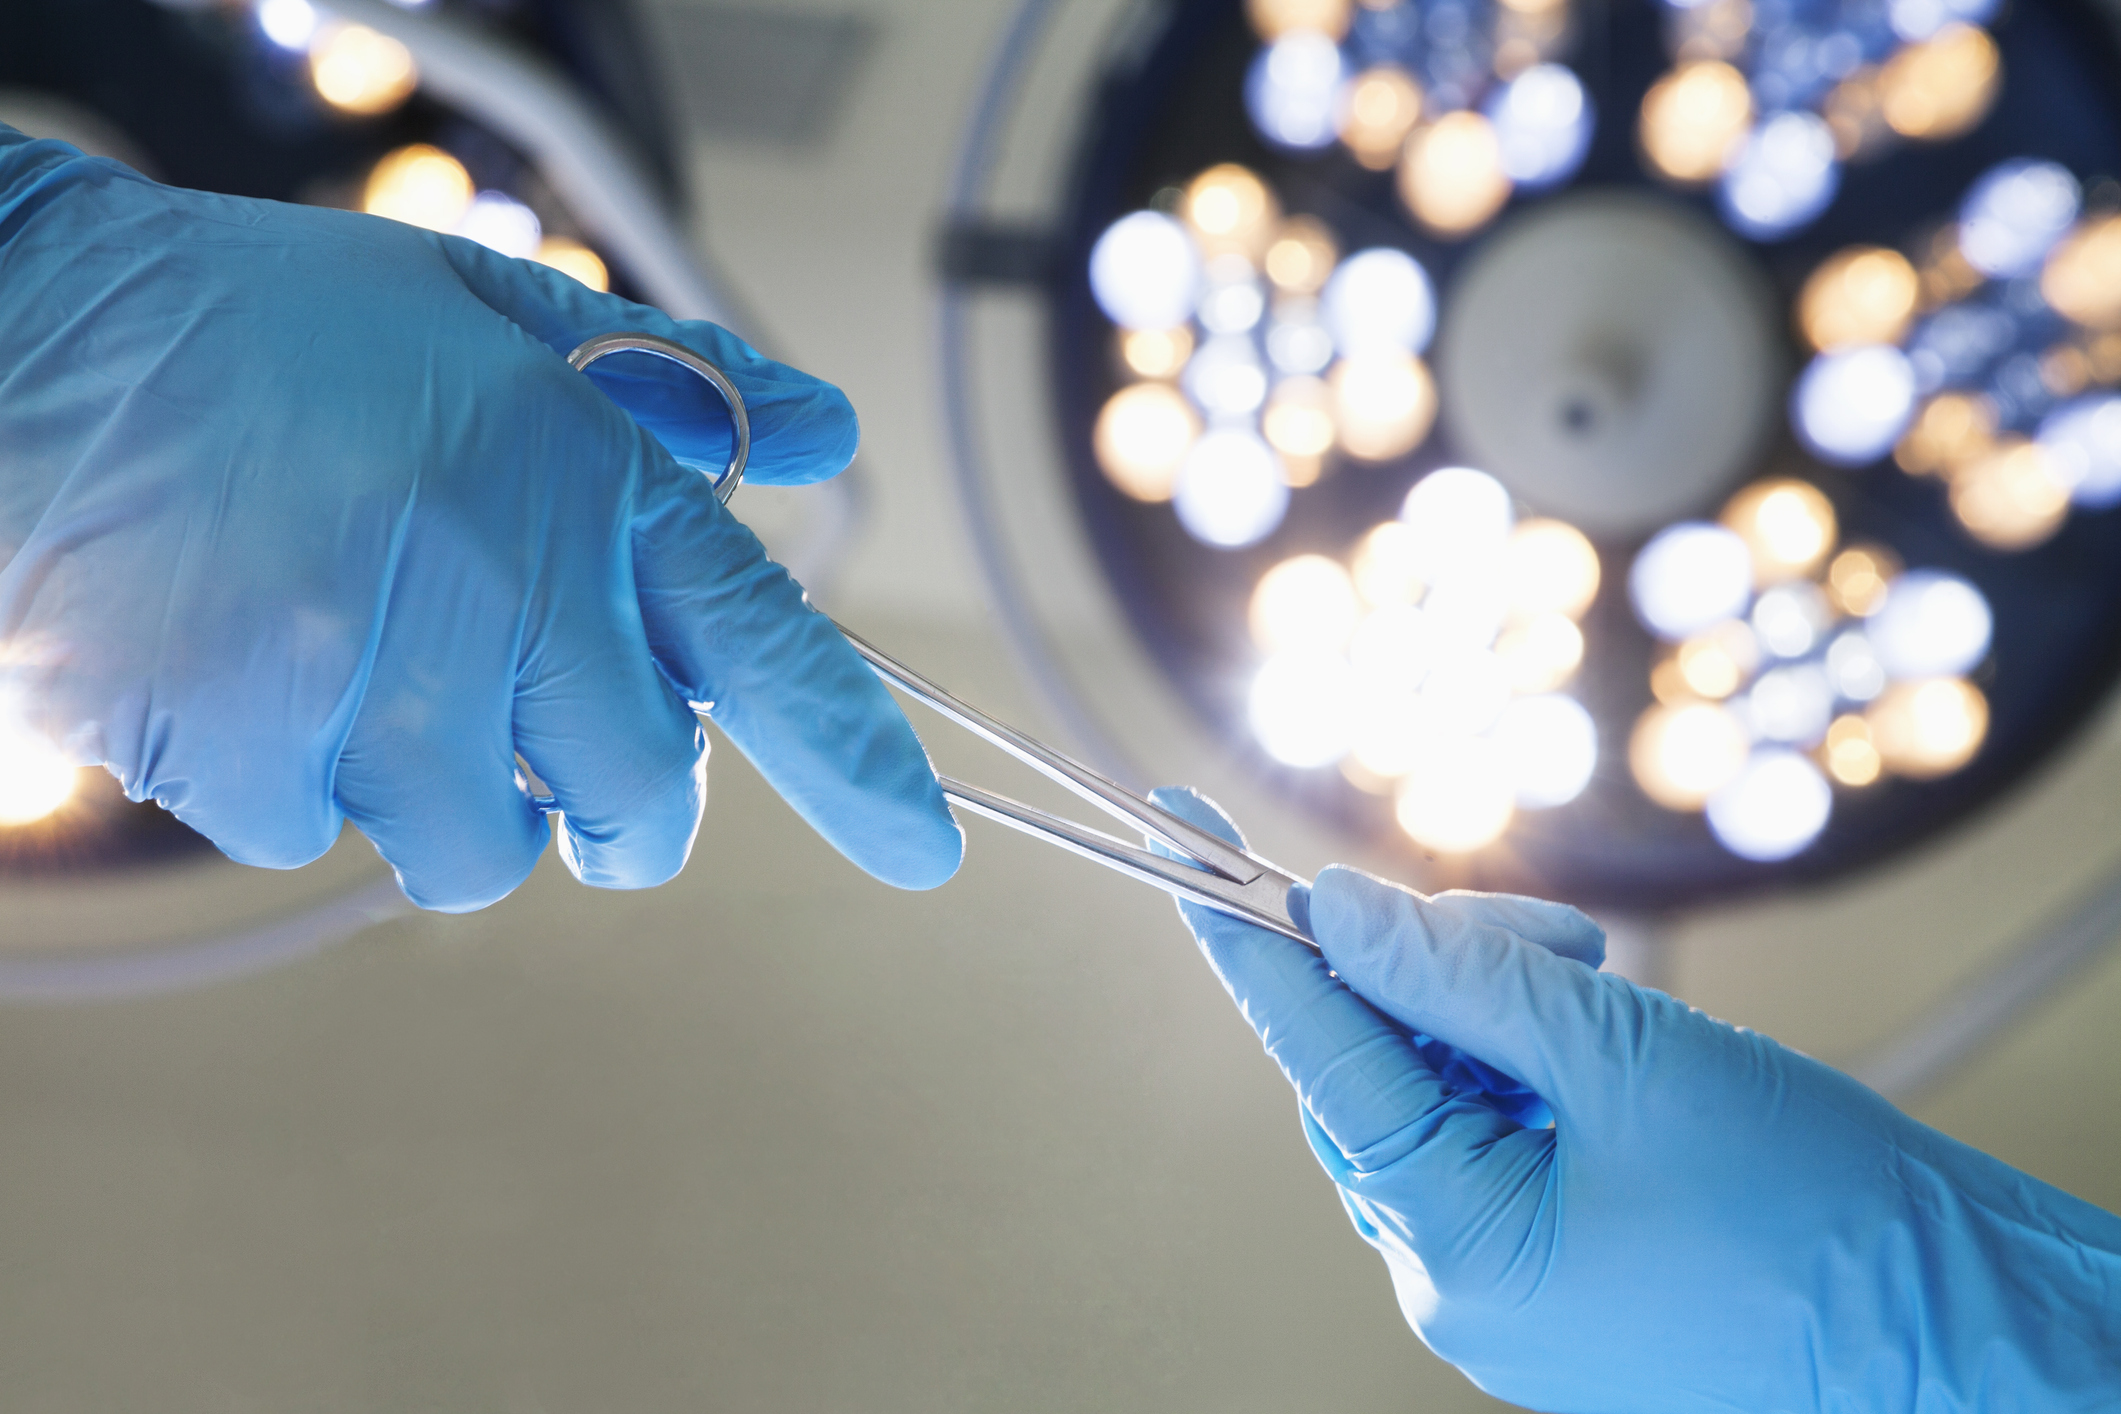 Close-up of gloved hands passing the surgical scissors